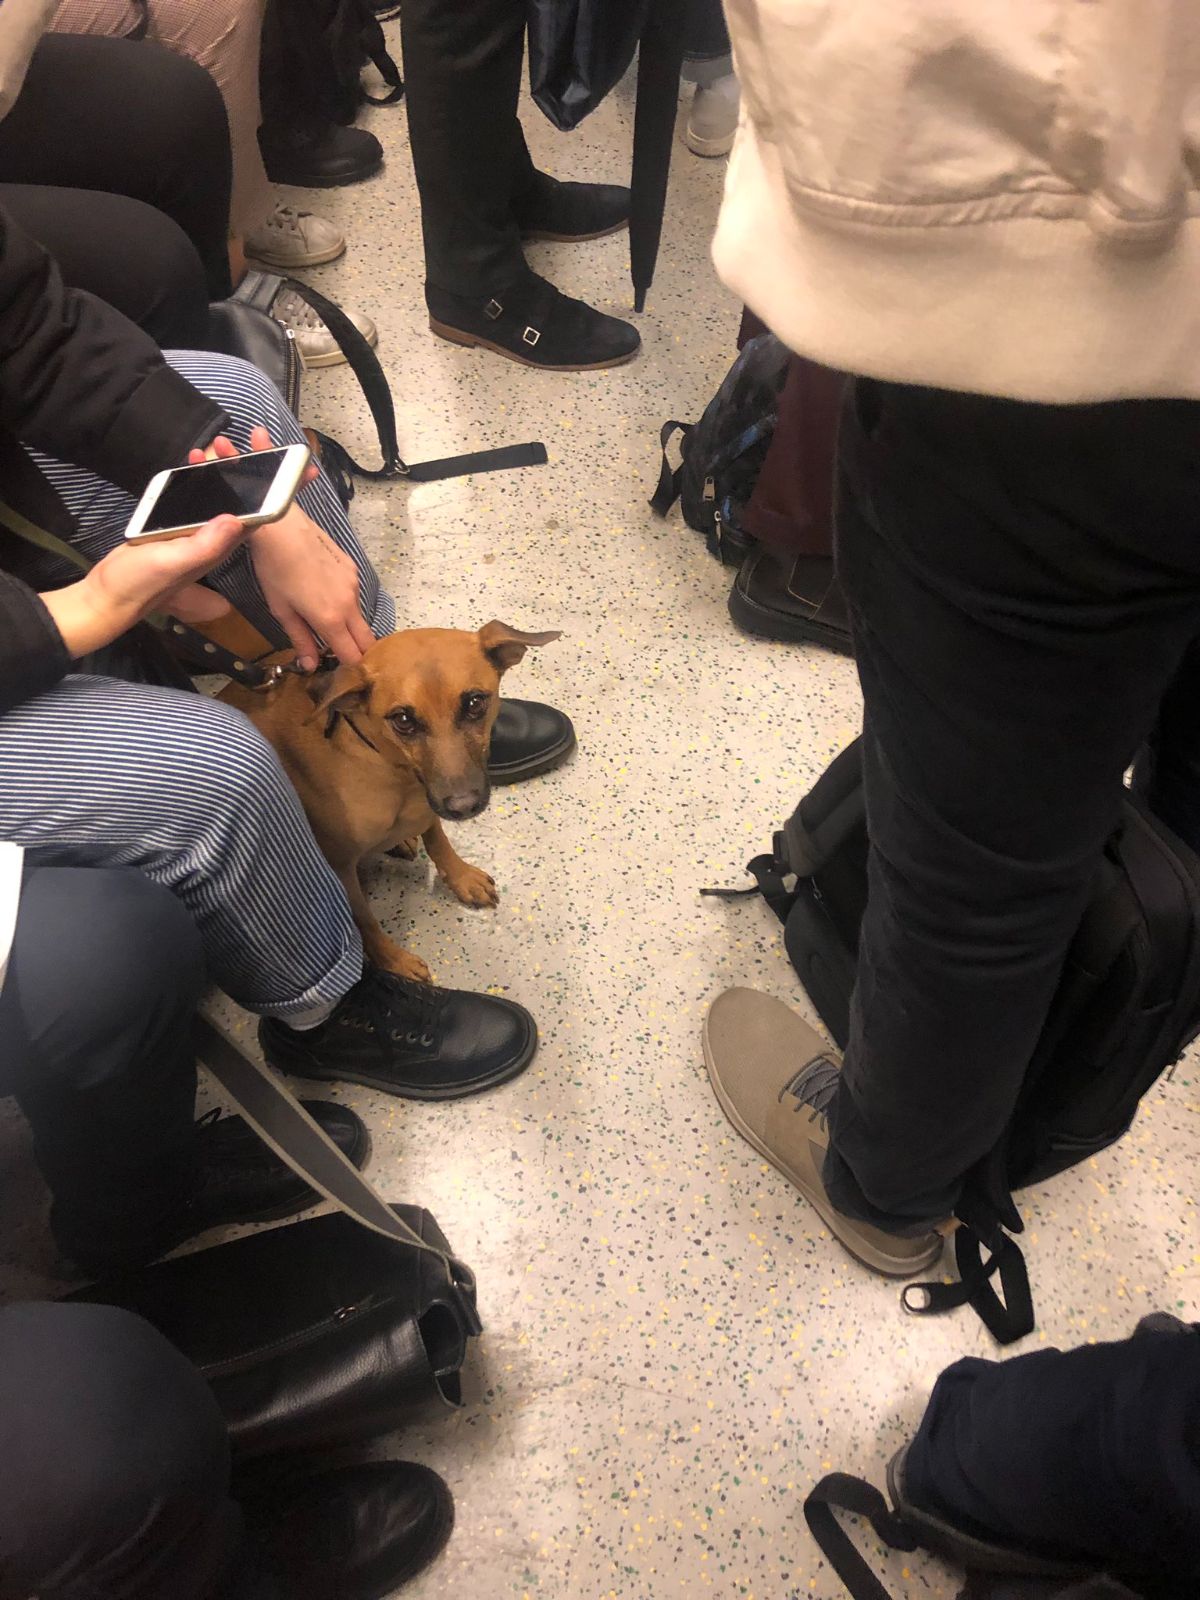 small brown dog held by someone and the dog is sitting on the train floor surrounded by people